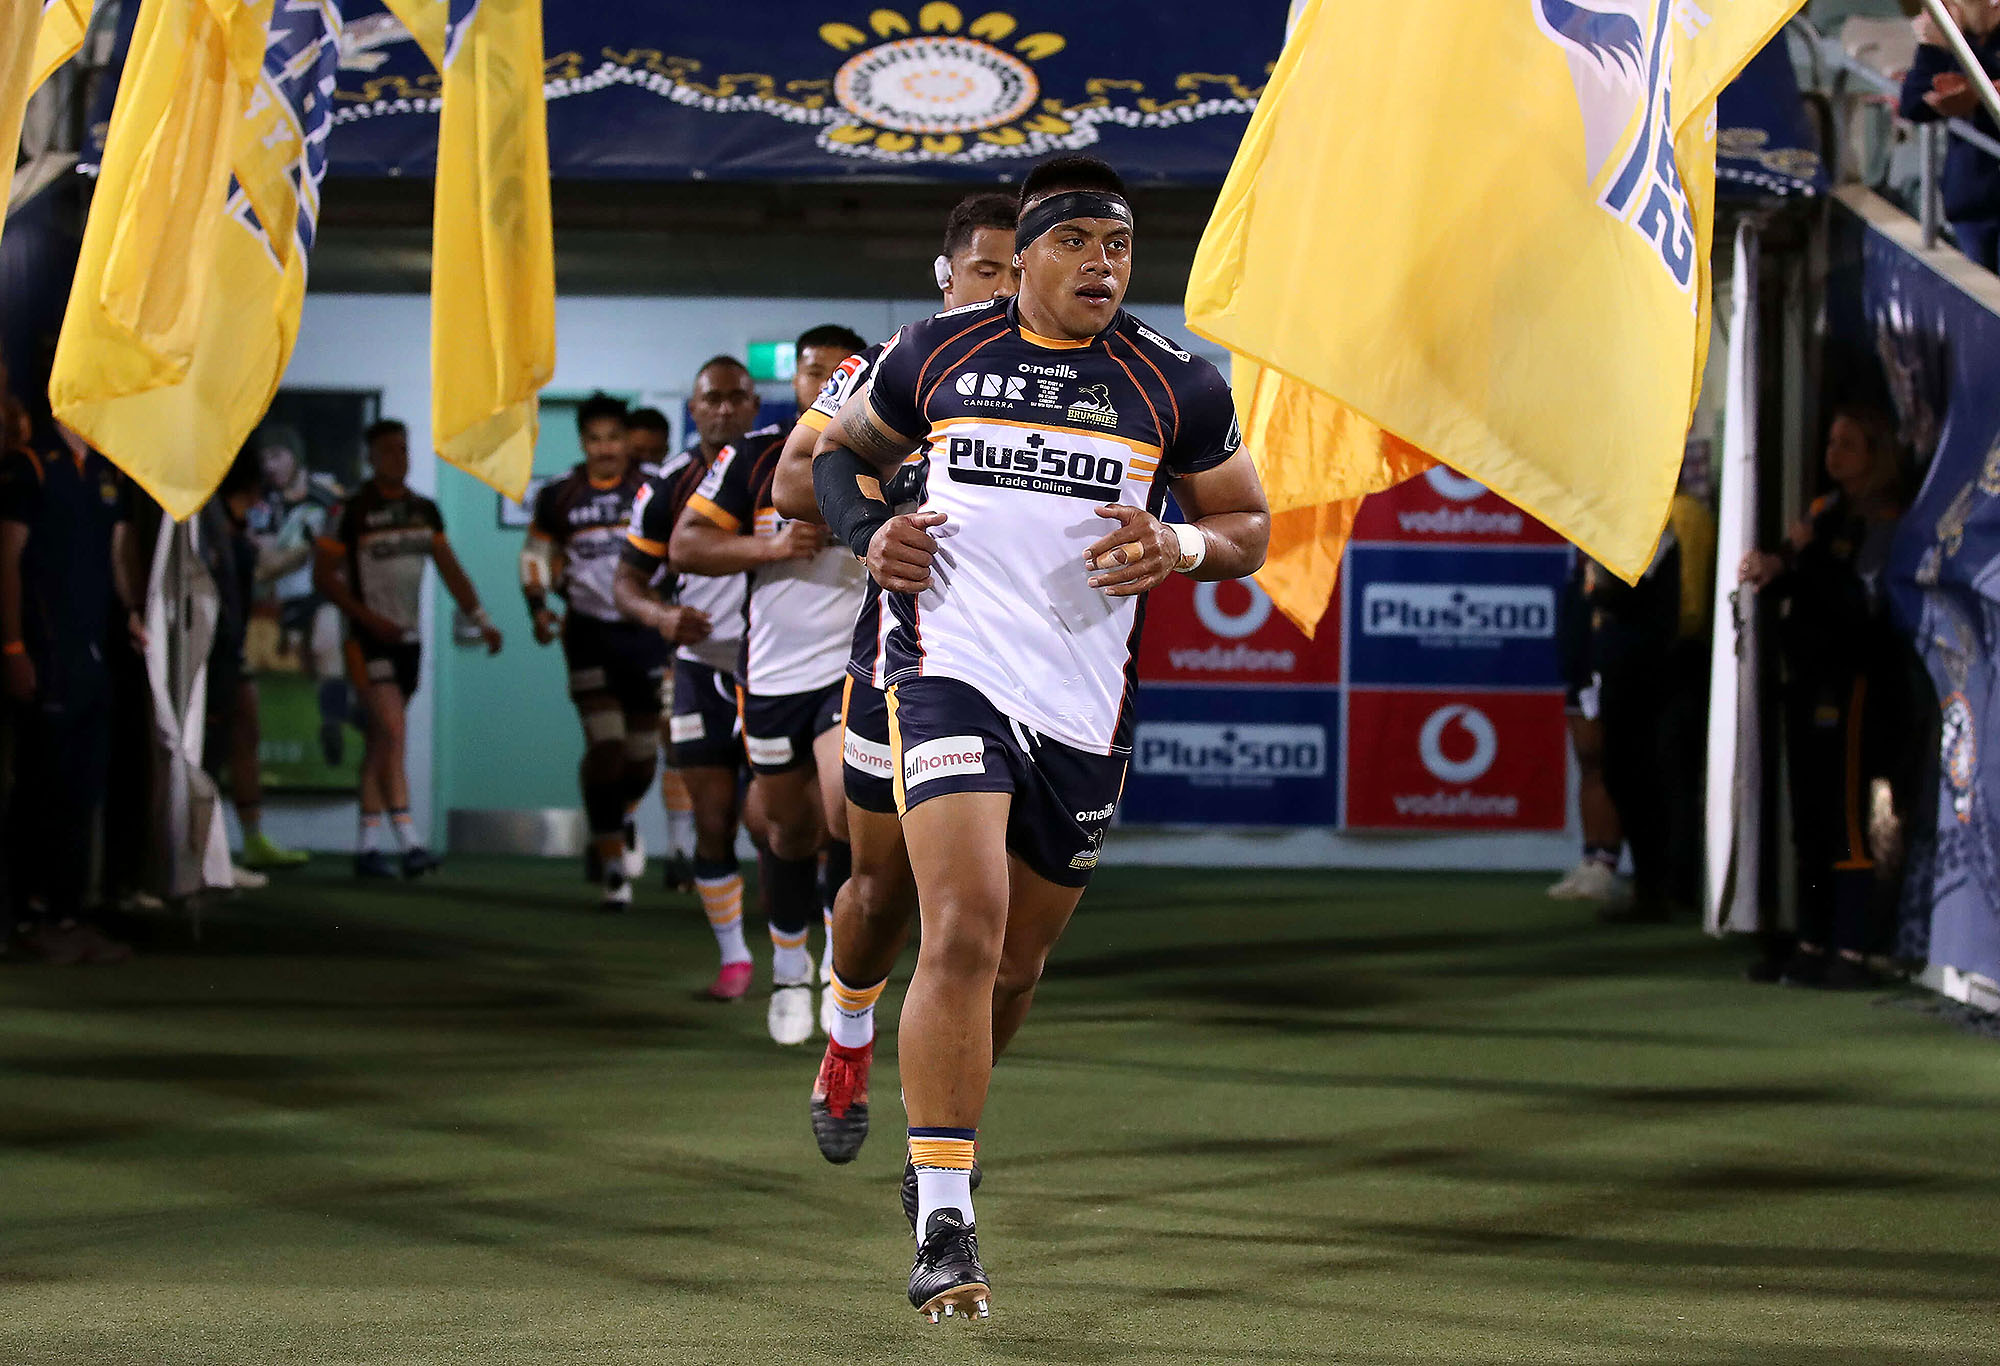 Allan Alaalatoa of the Brumbies leads out players